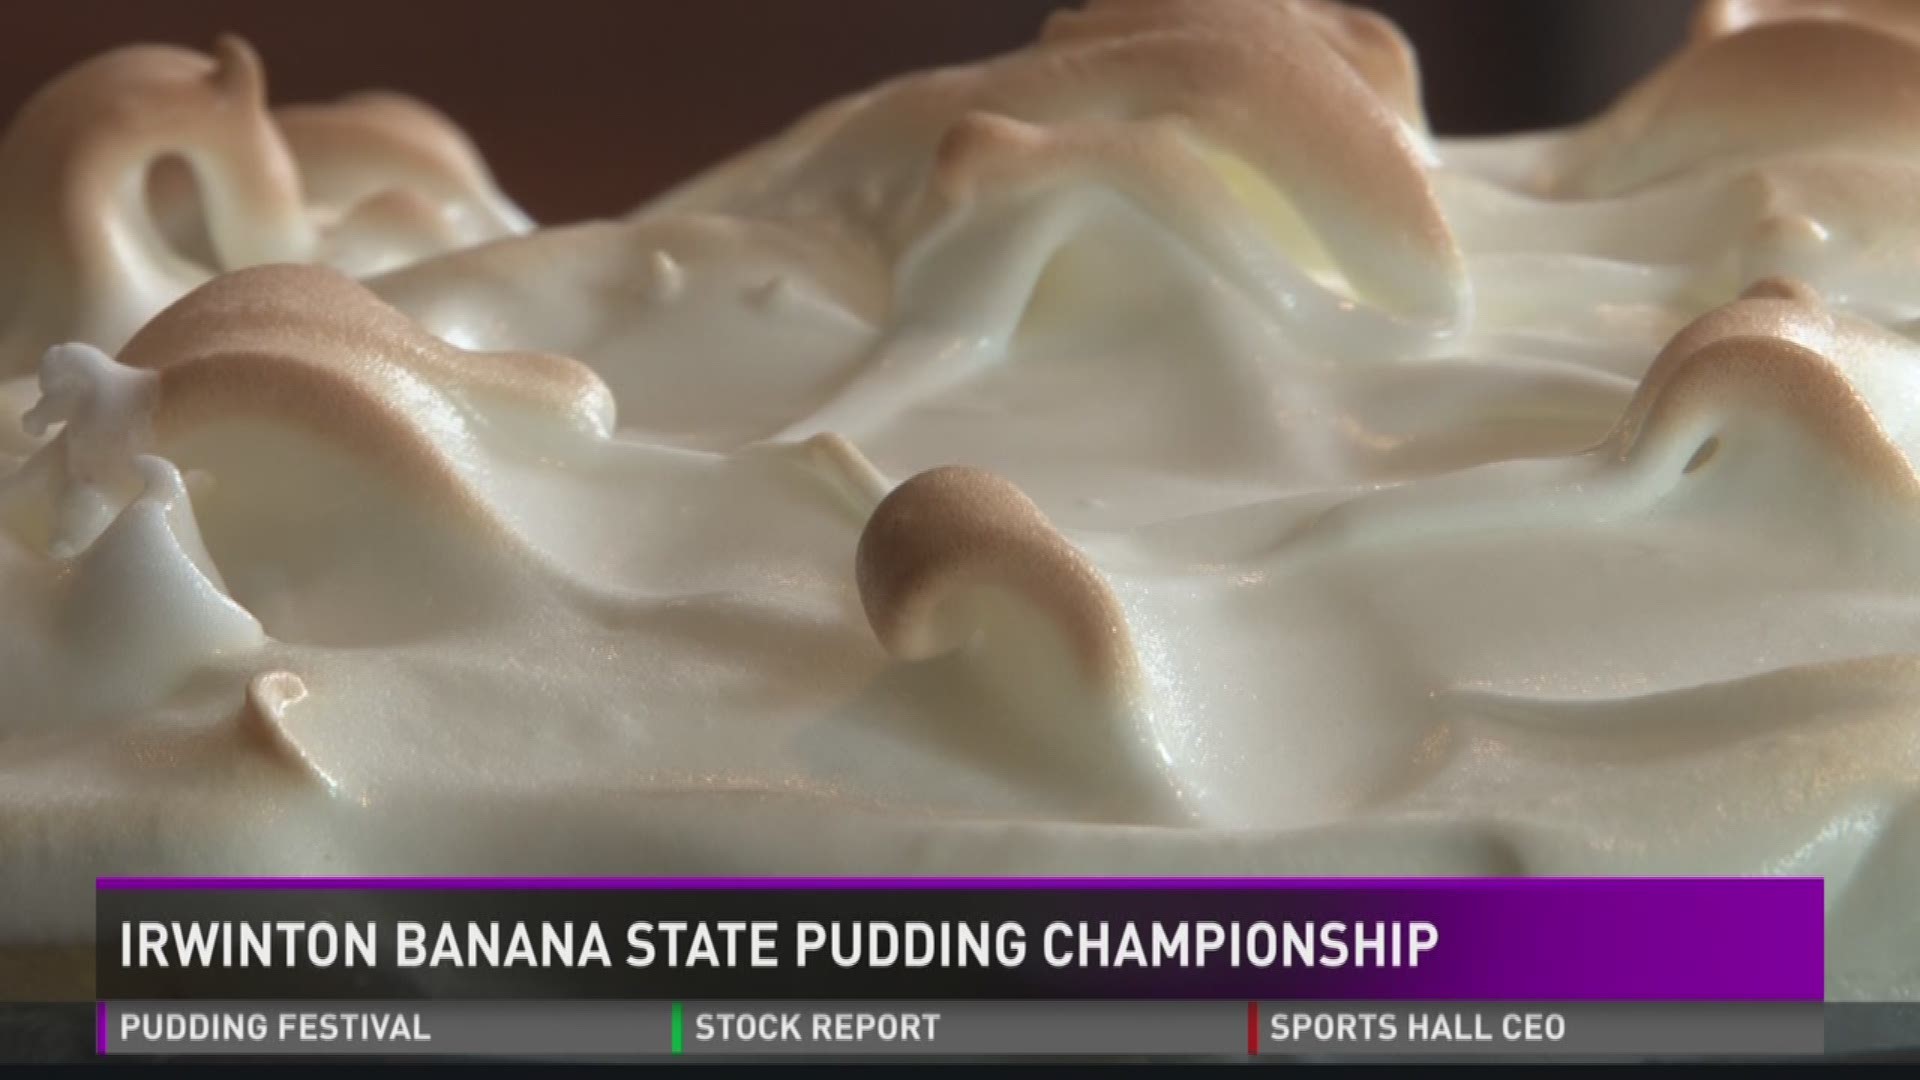 State banana pudding contest set for next weekend in Irwinton